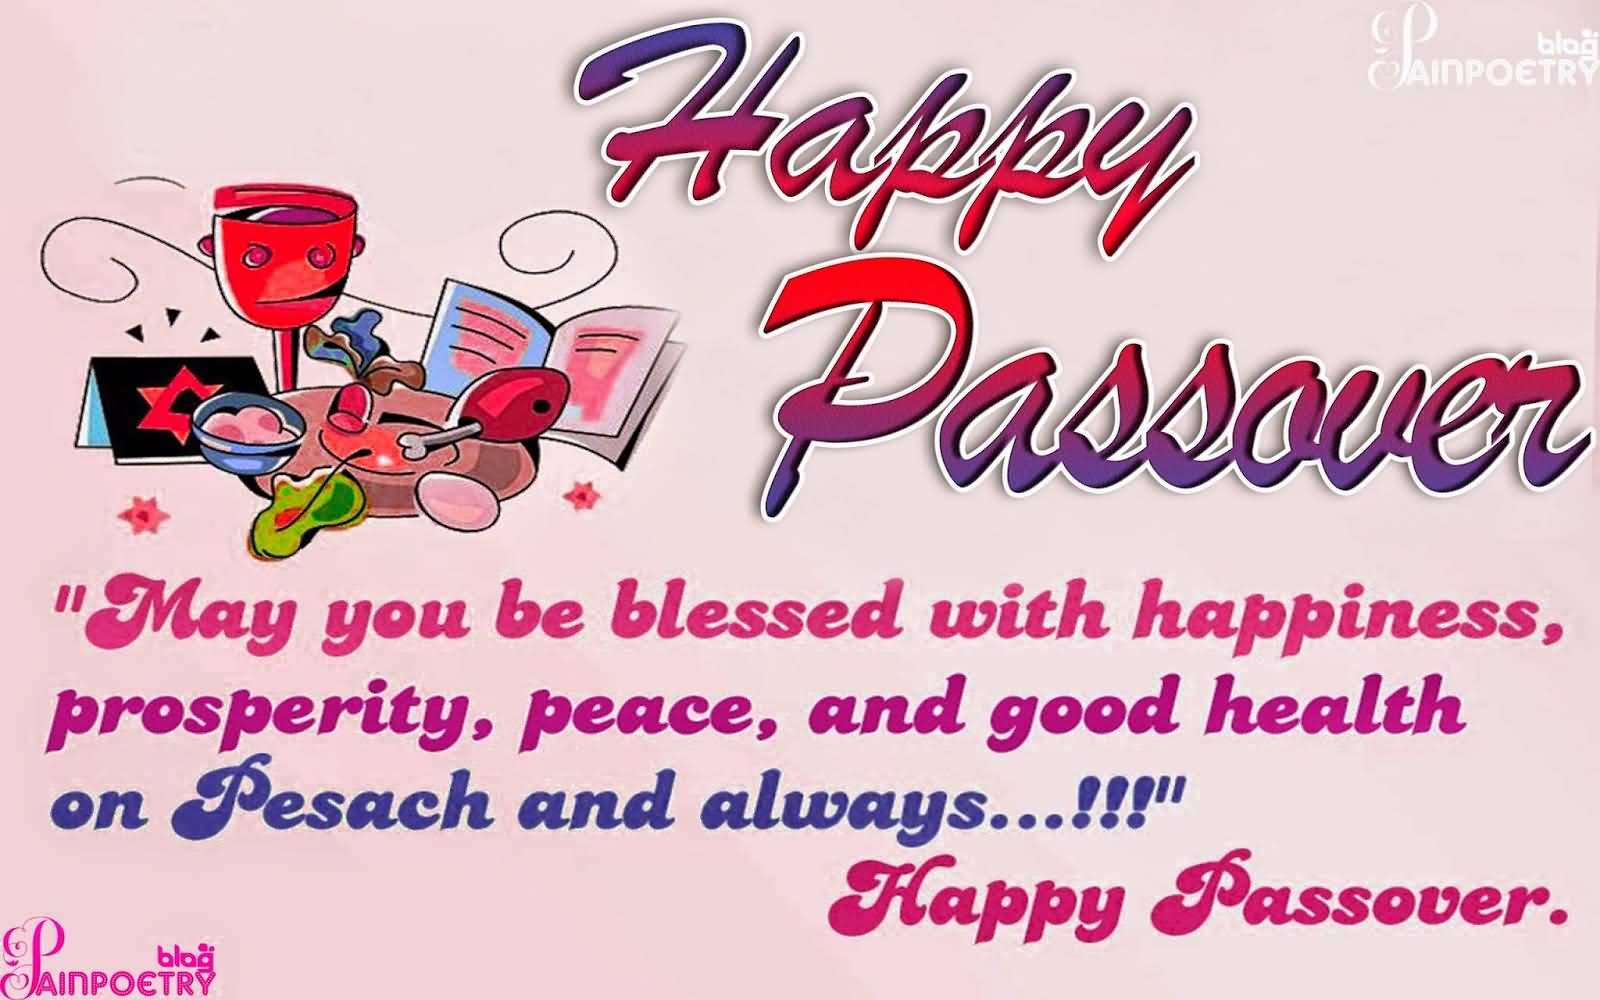 Happy Passover Wishes Greetings Message Image